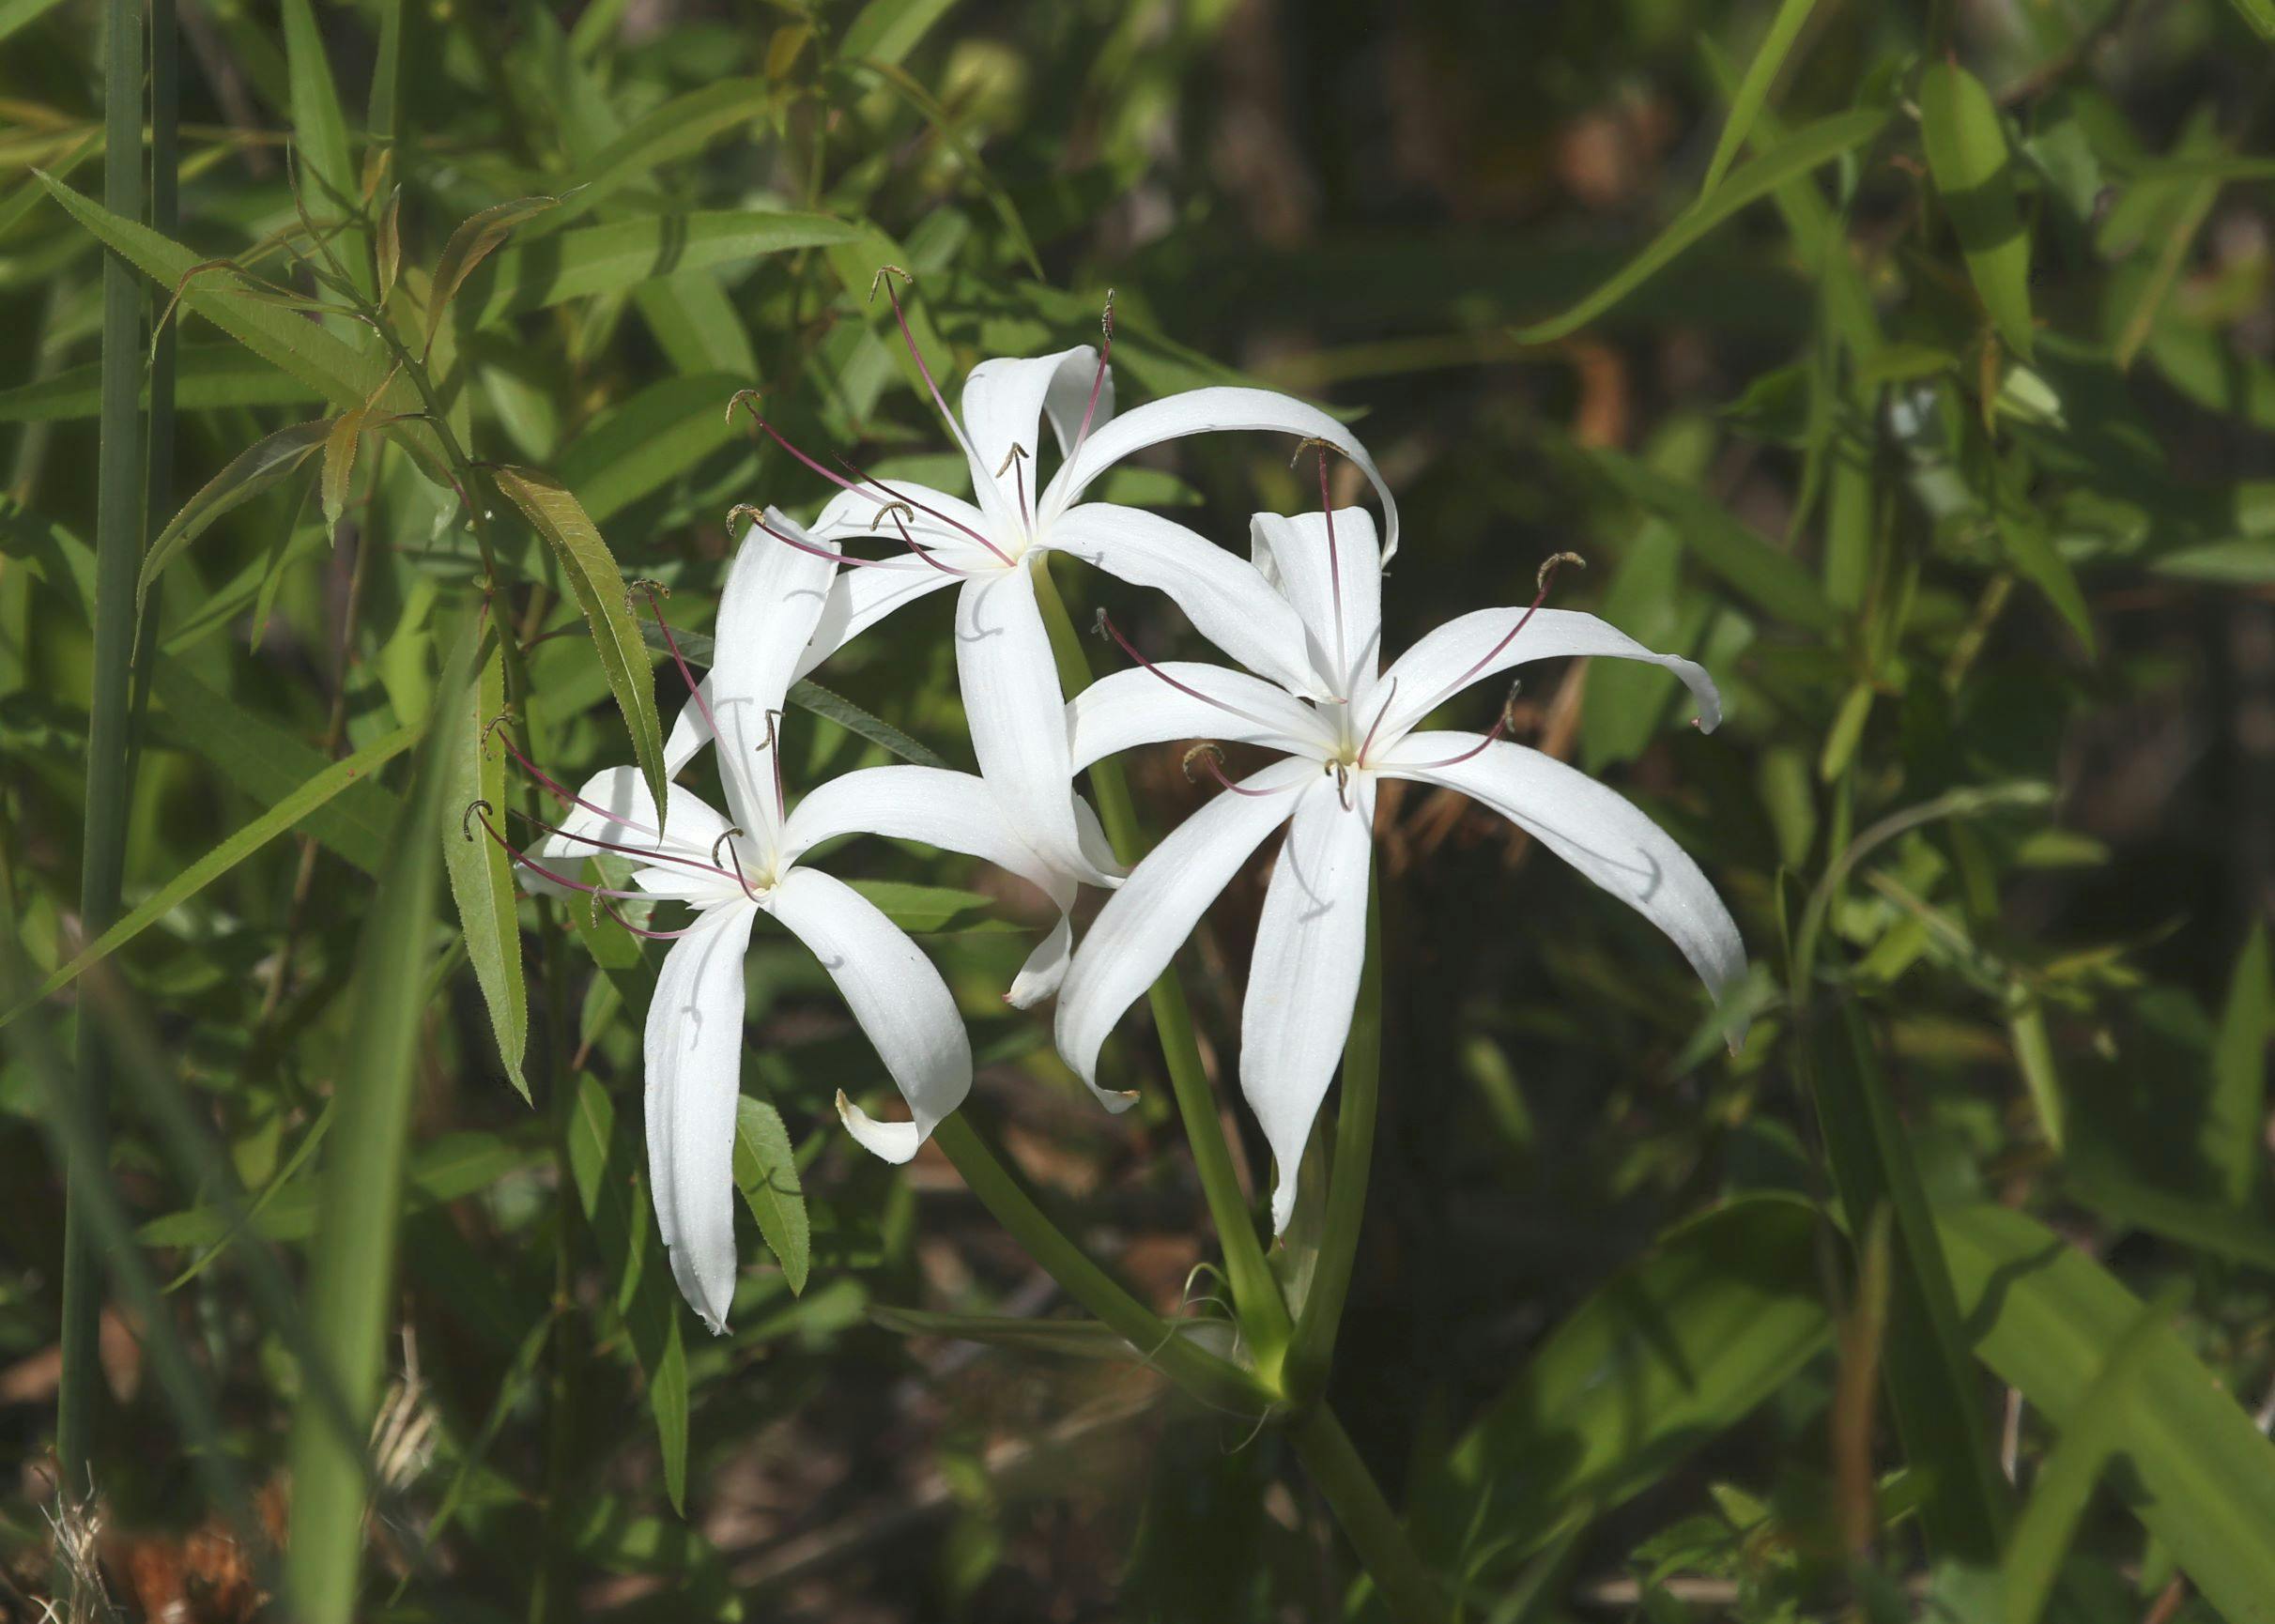 White river lily flowers with blurred green leaves in background. 